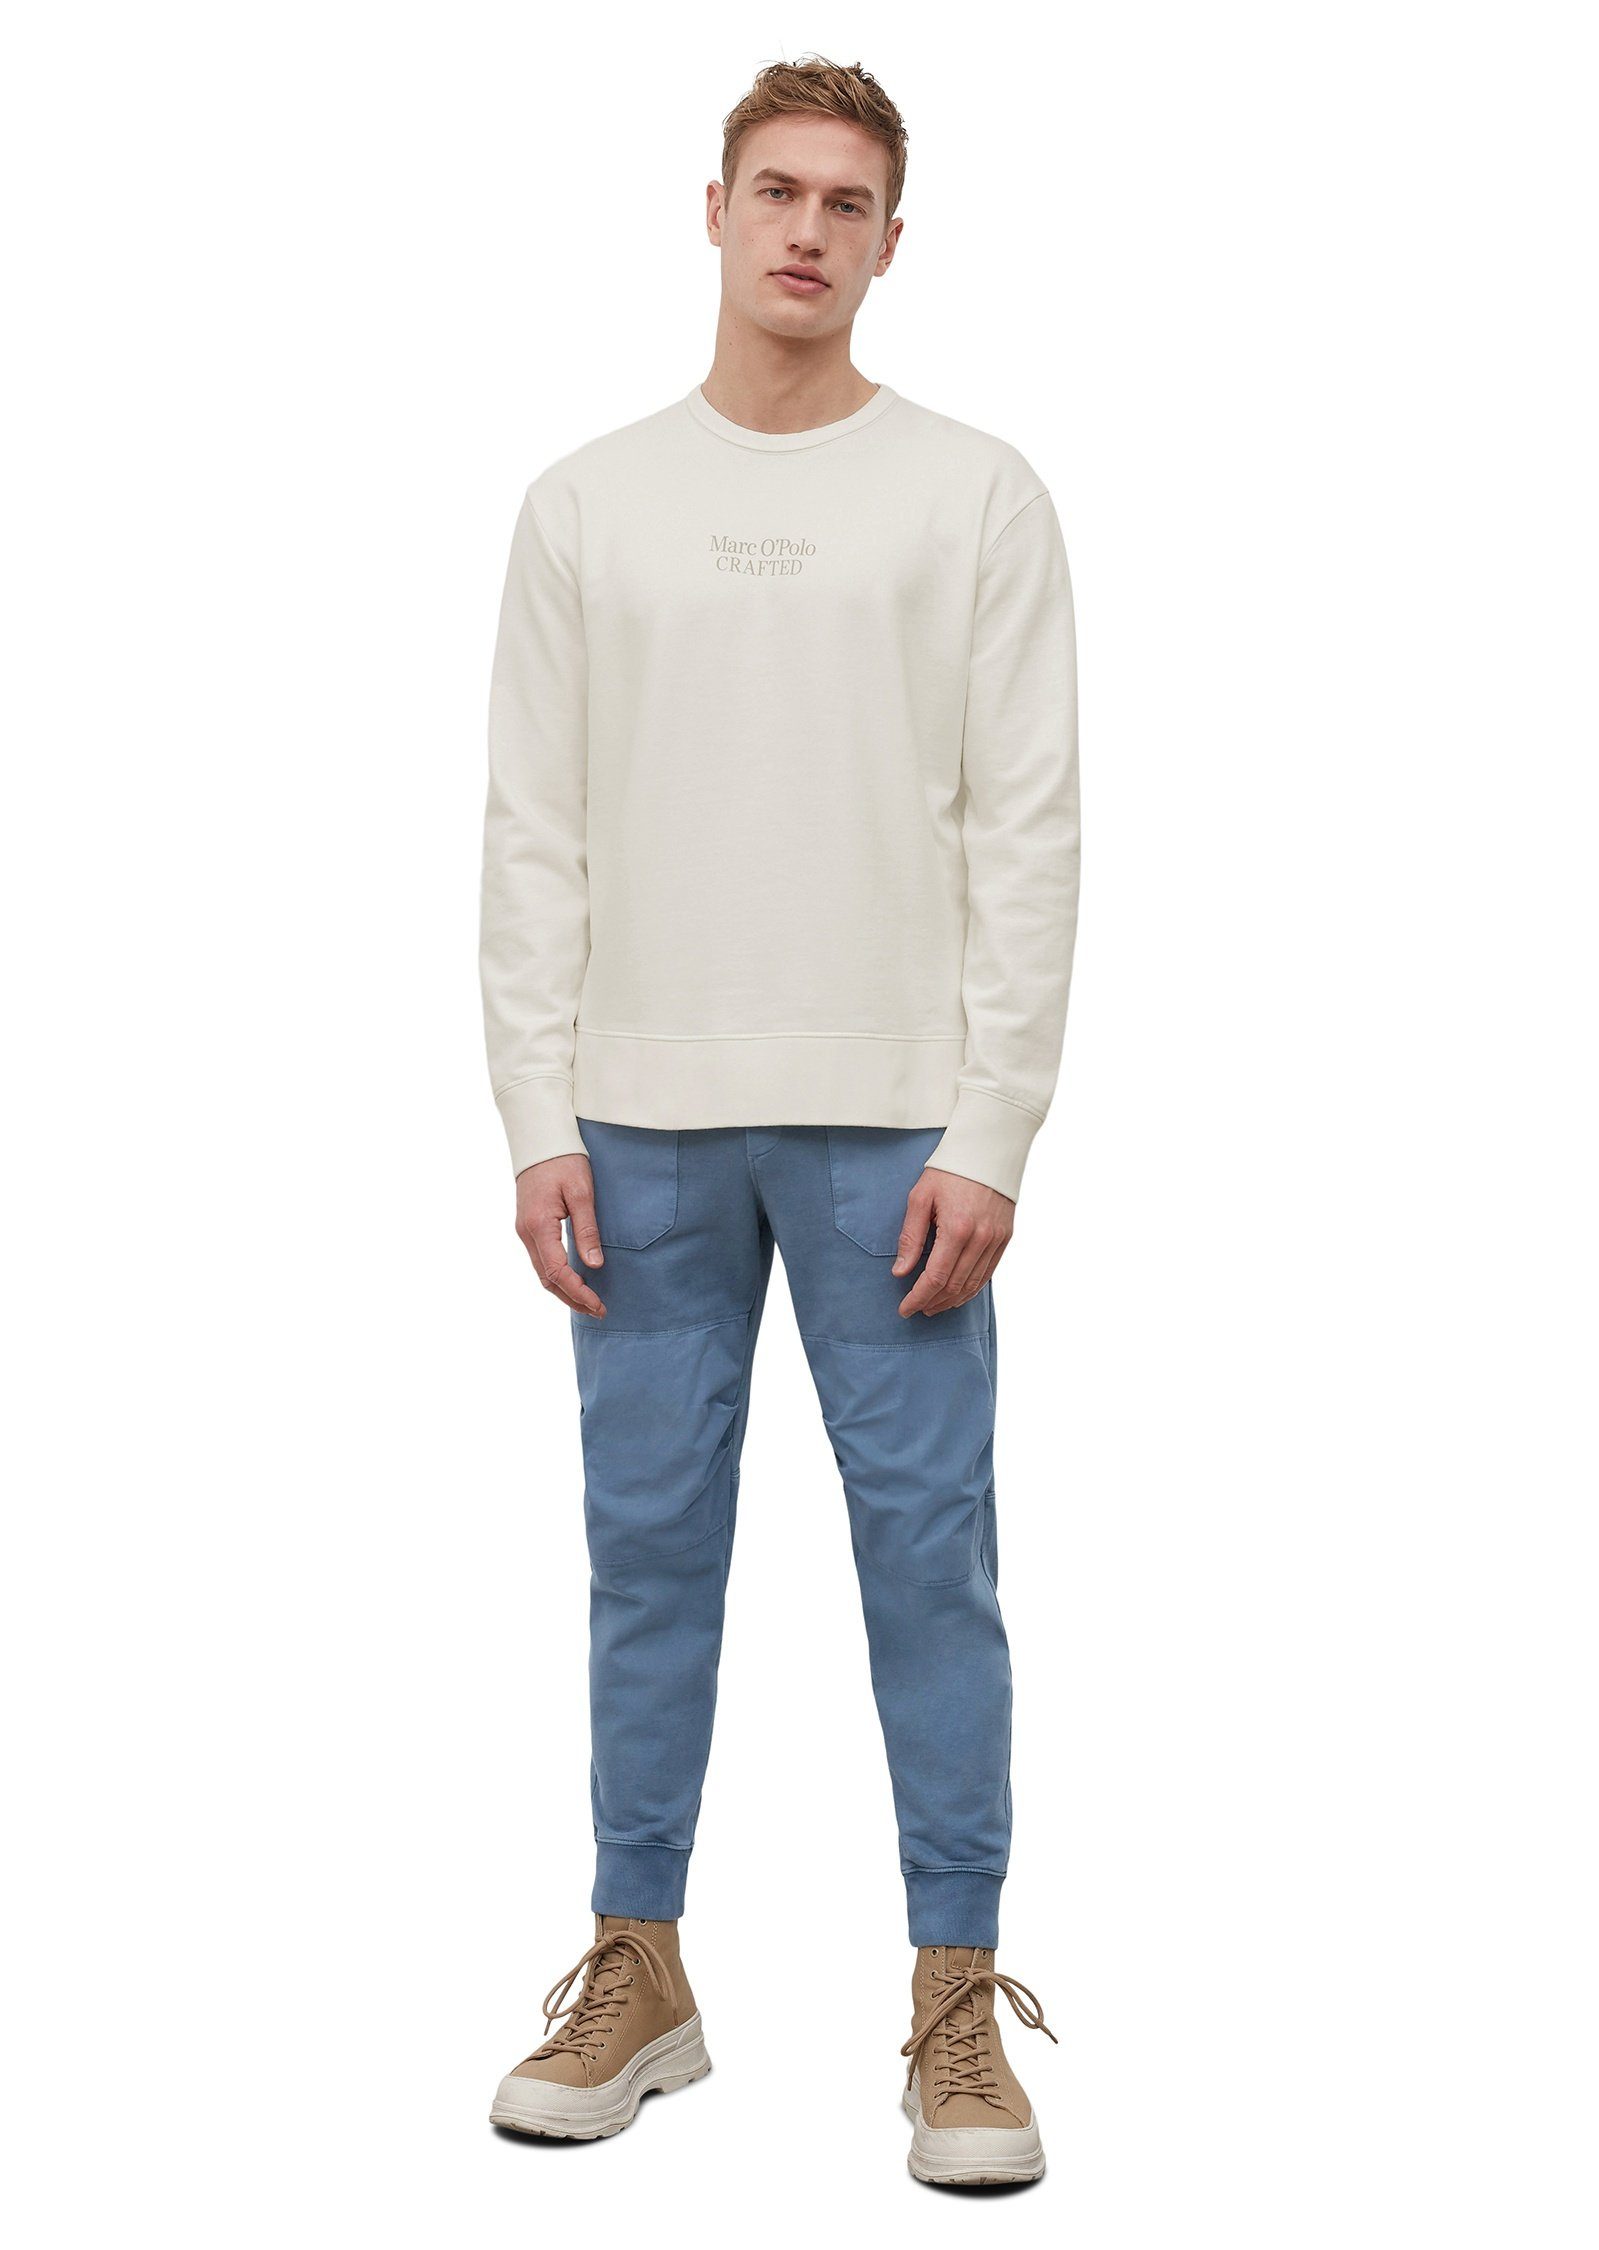 Terry-Sweat-Qualität in Marc softer O'Polo Sweatshirt